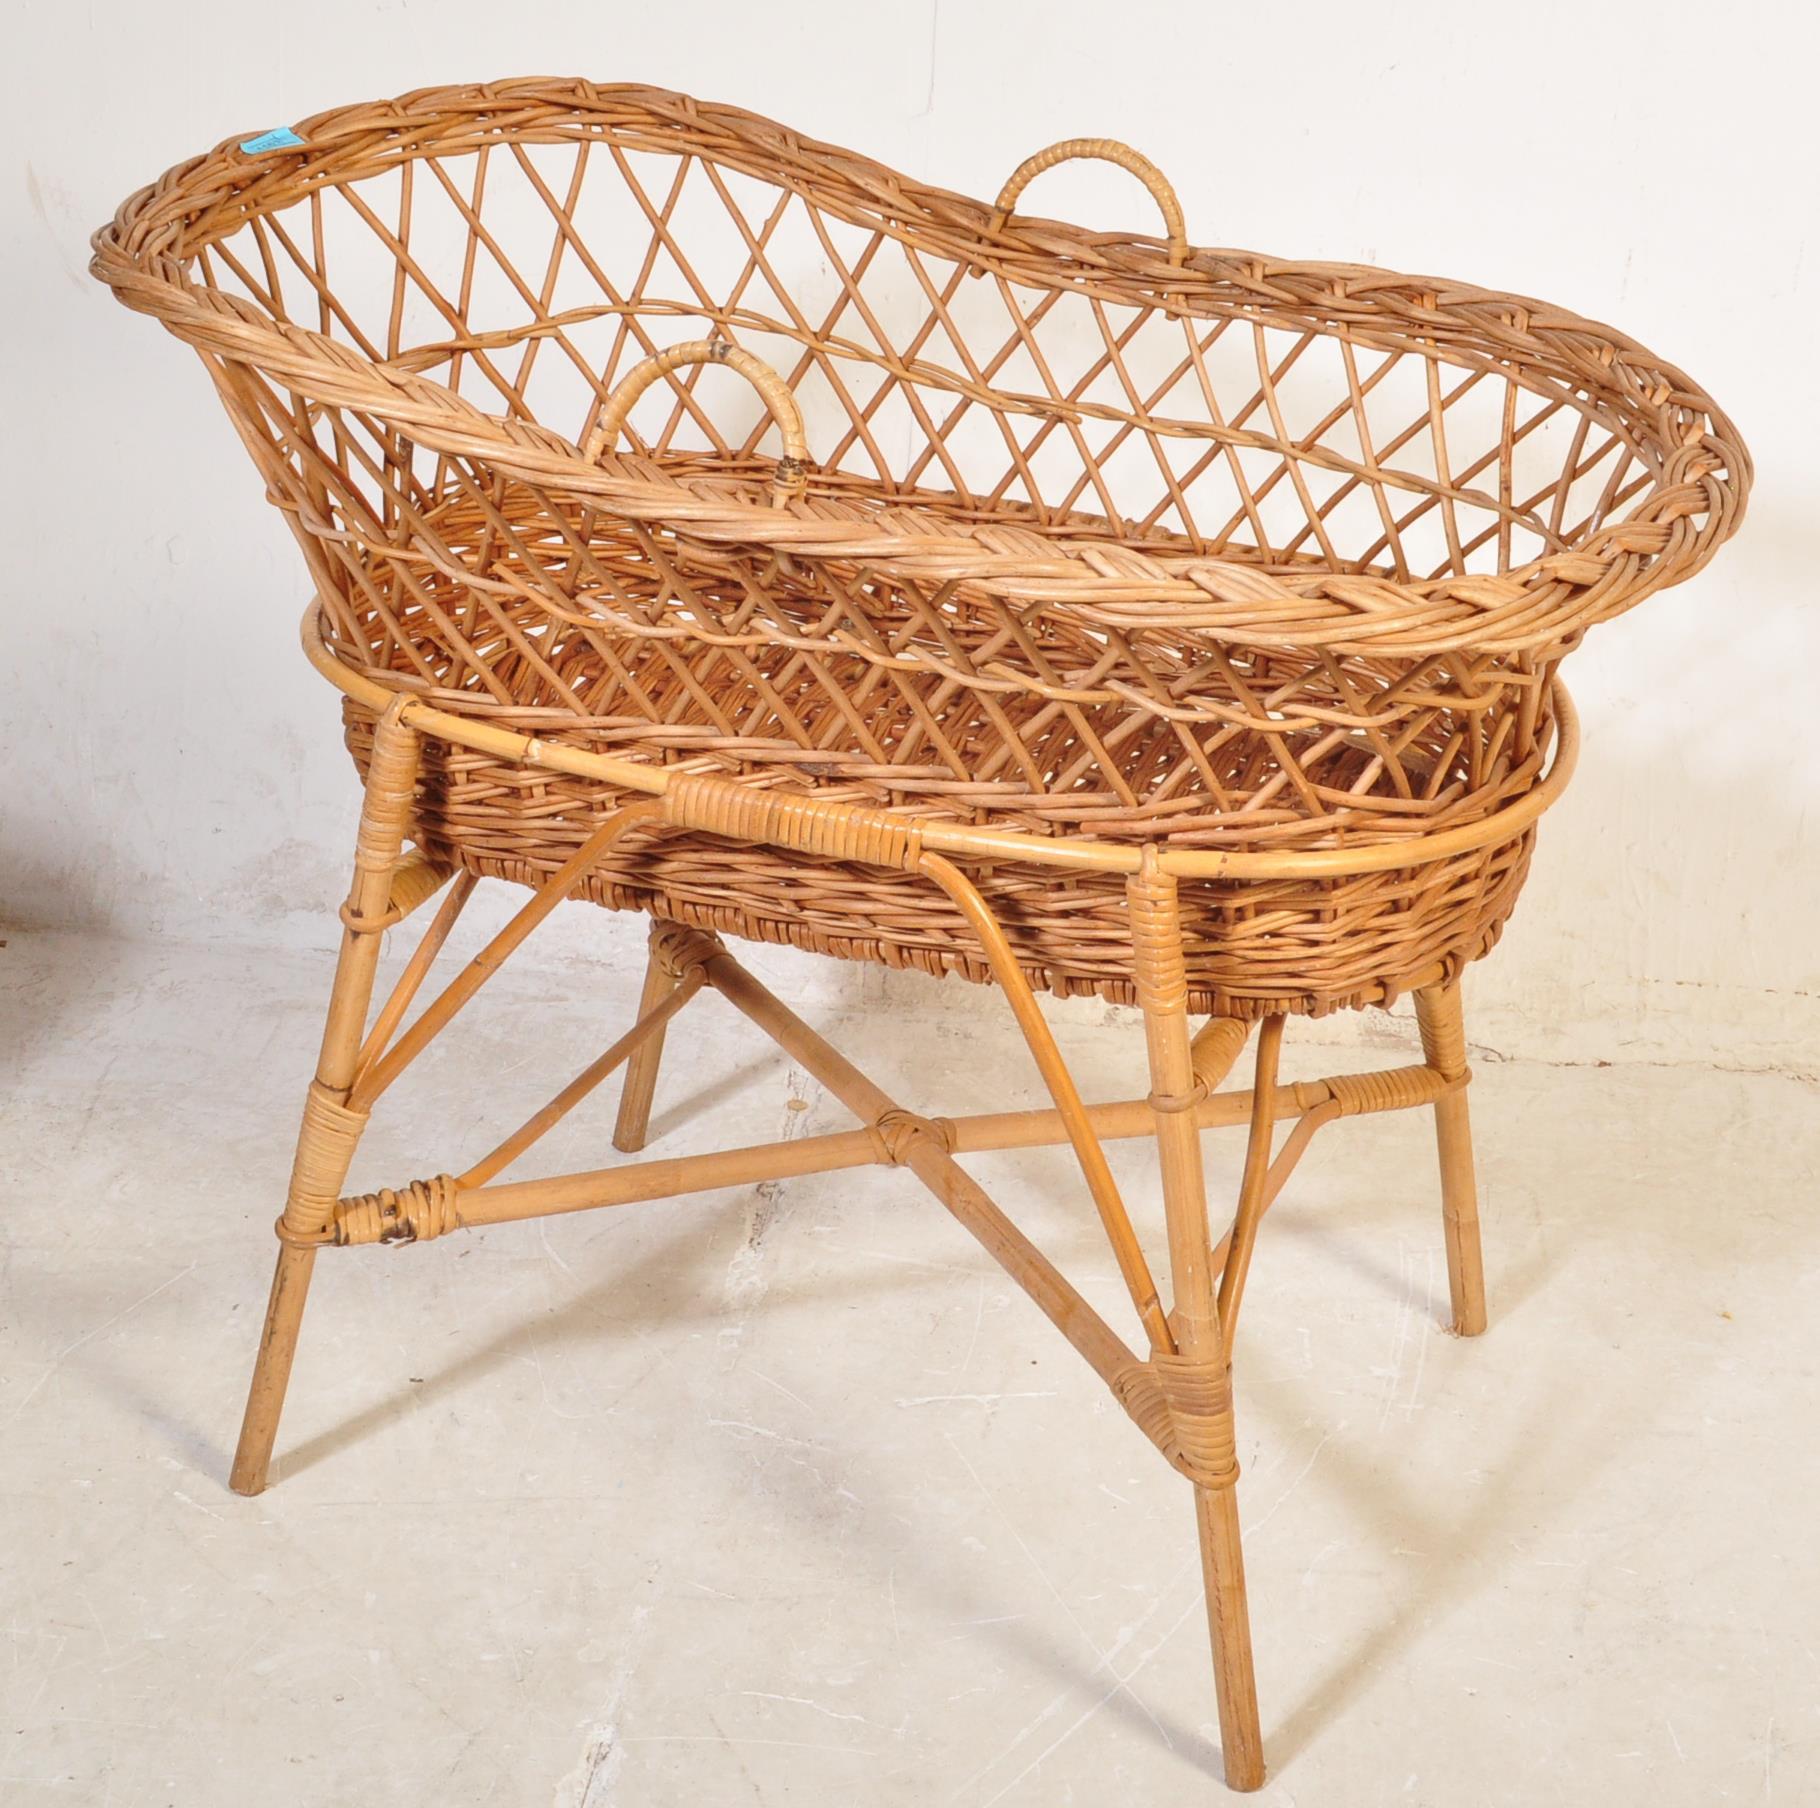 A RETRO VINTAGE CANED WICKER BAMBOO MOSES BASKET - Image 2 of 6